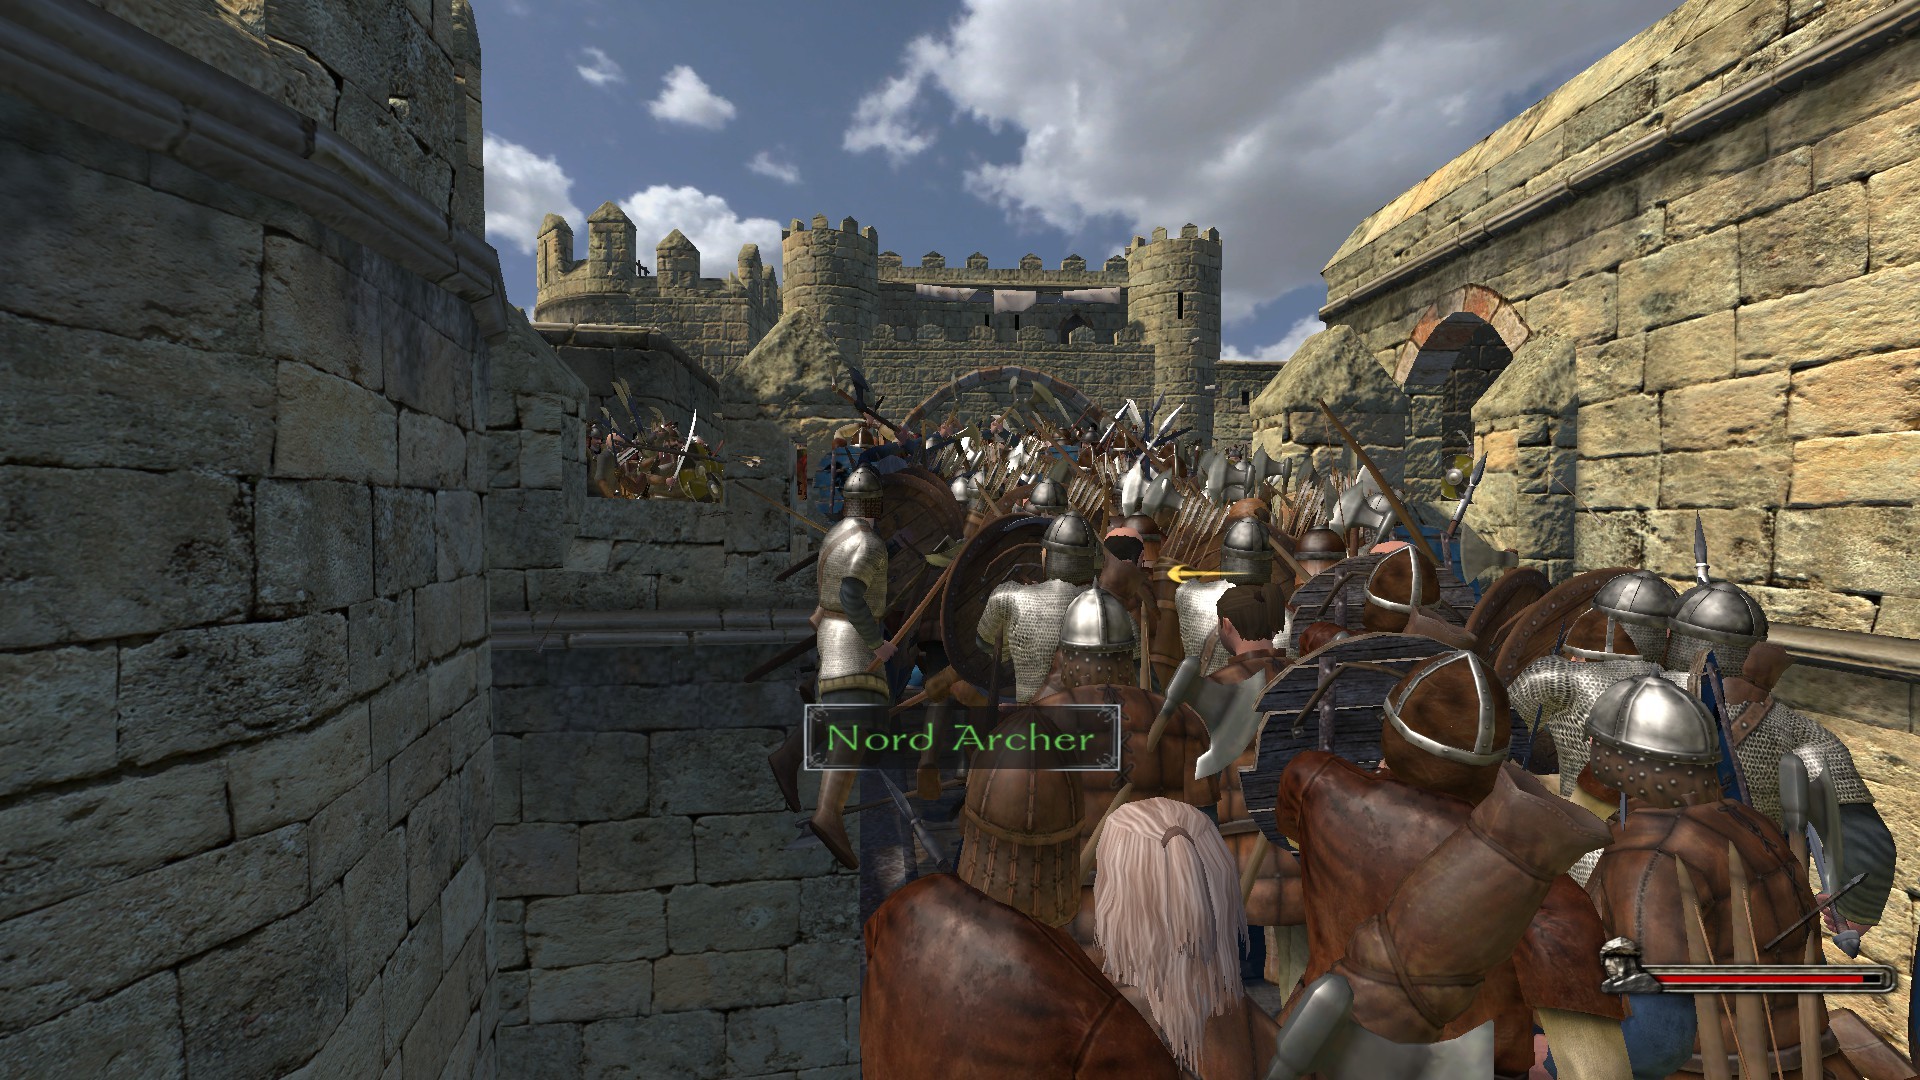 mount and blade warband serial key 2019